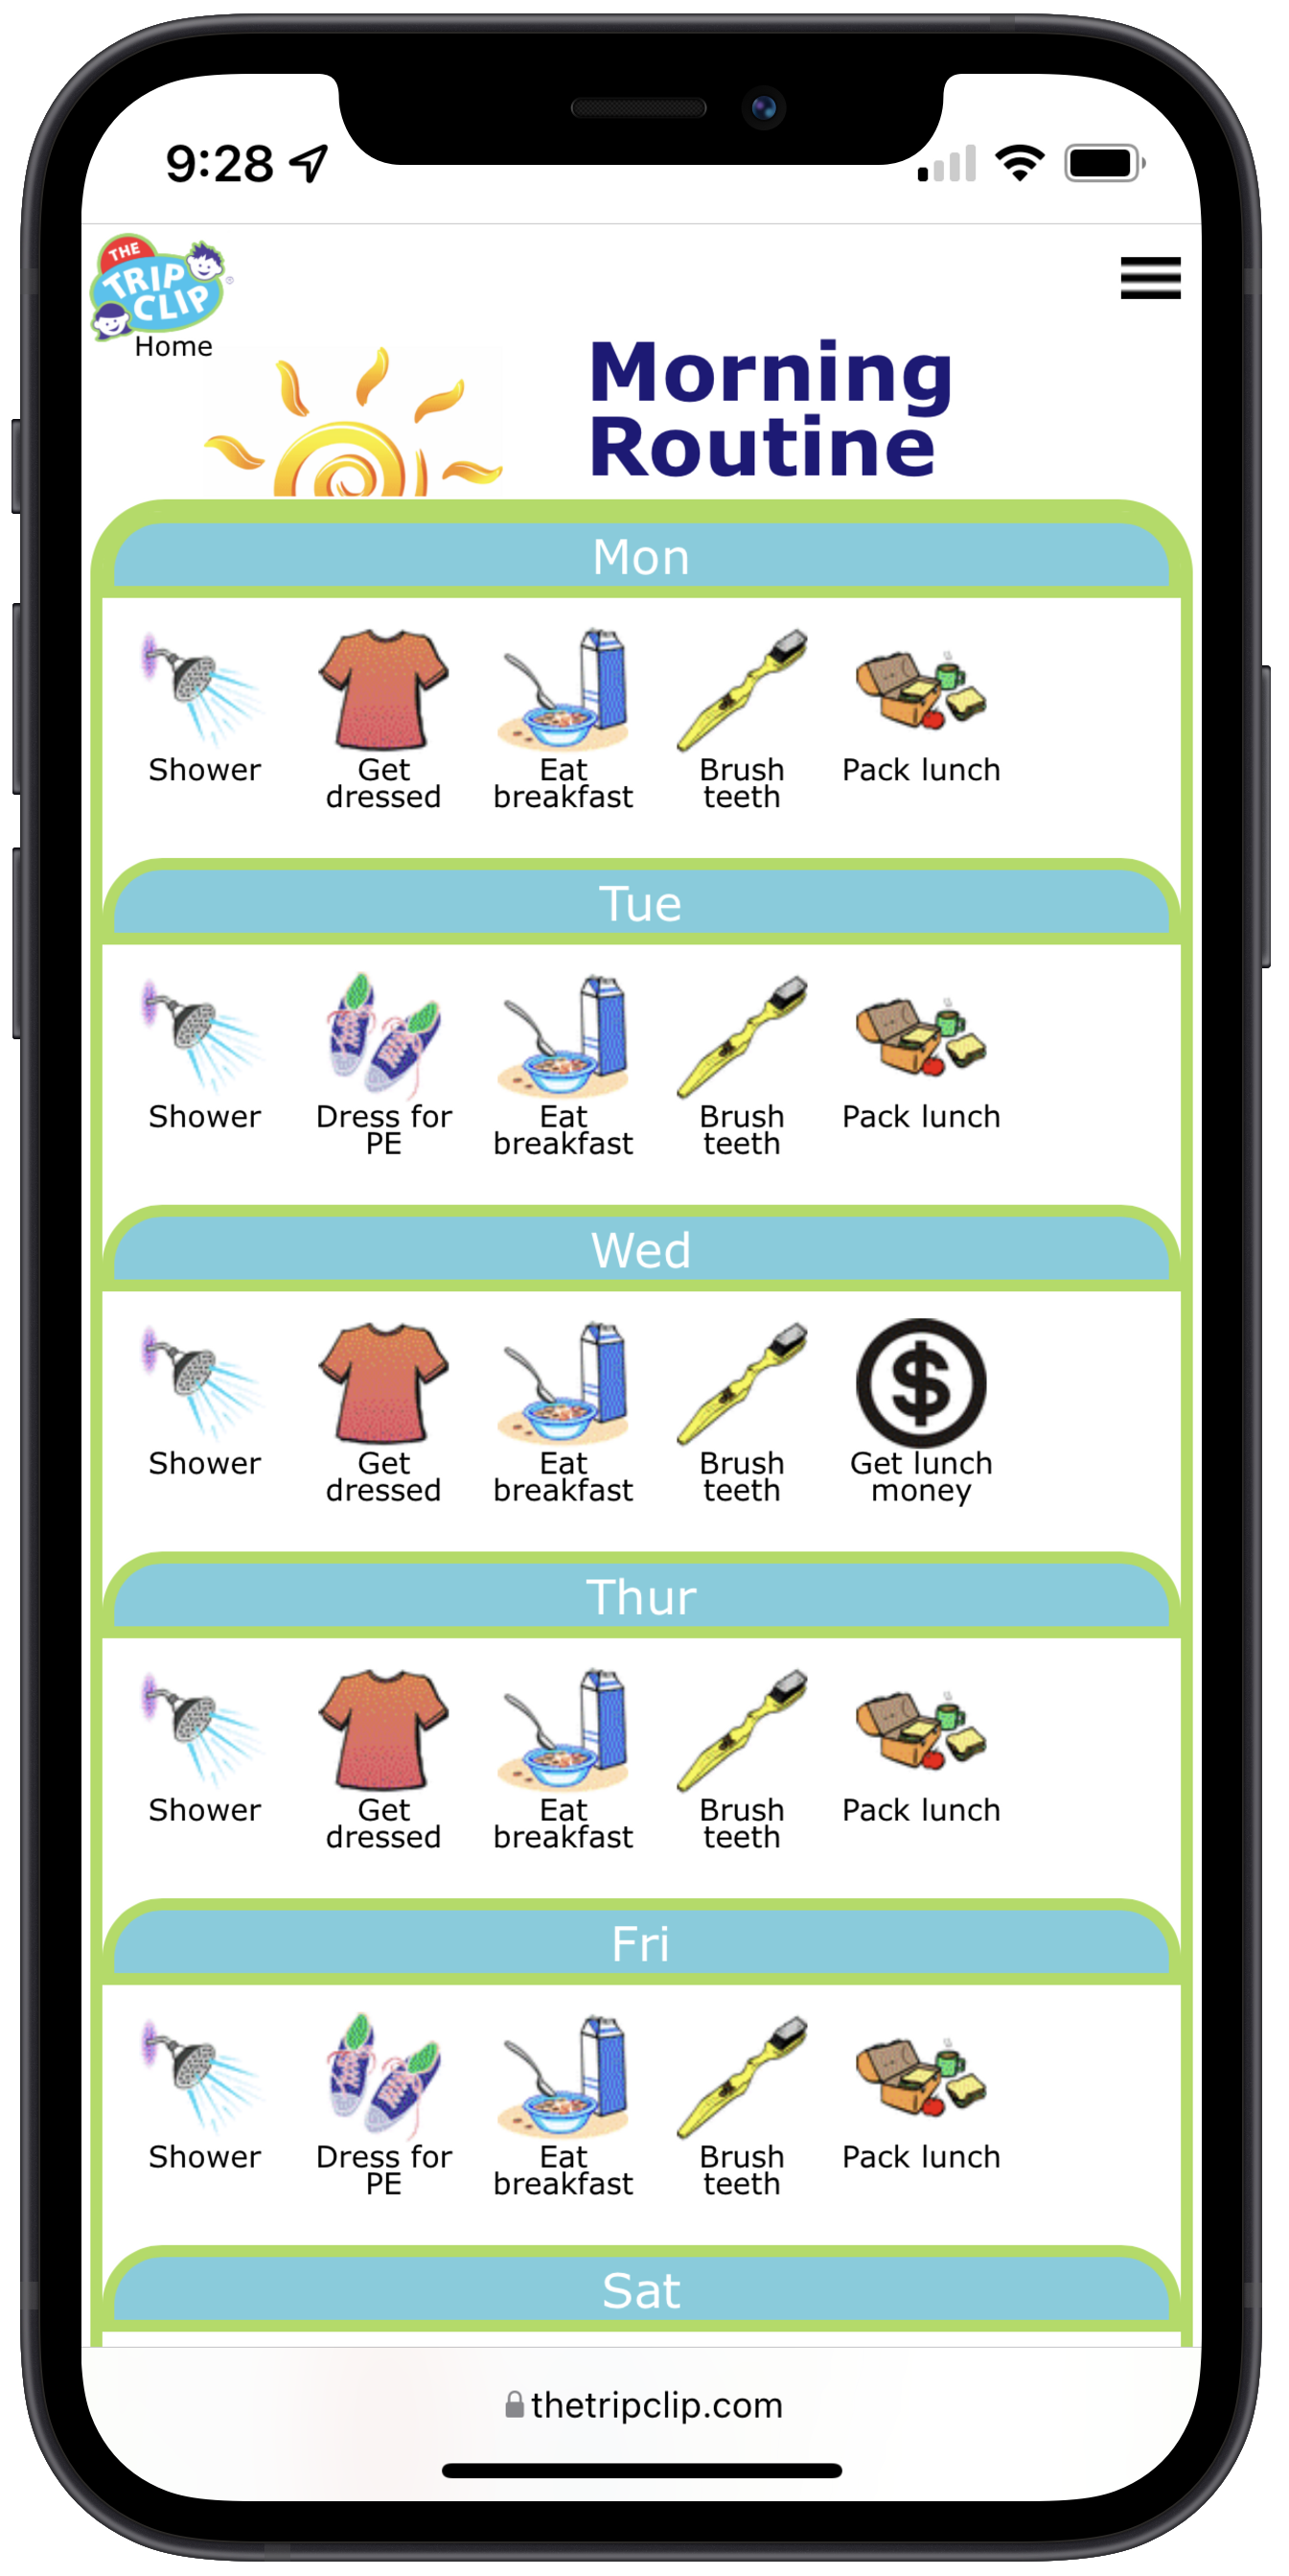 Morning routine picture checklist for kids on an iphone